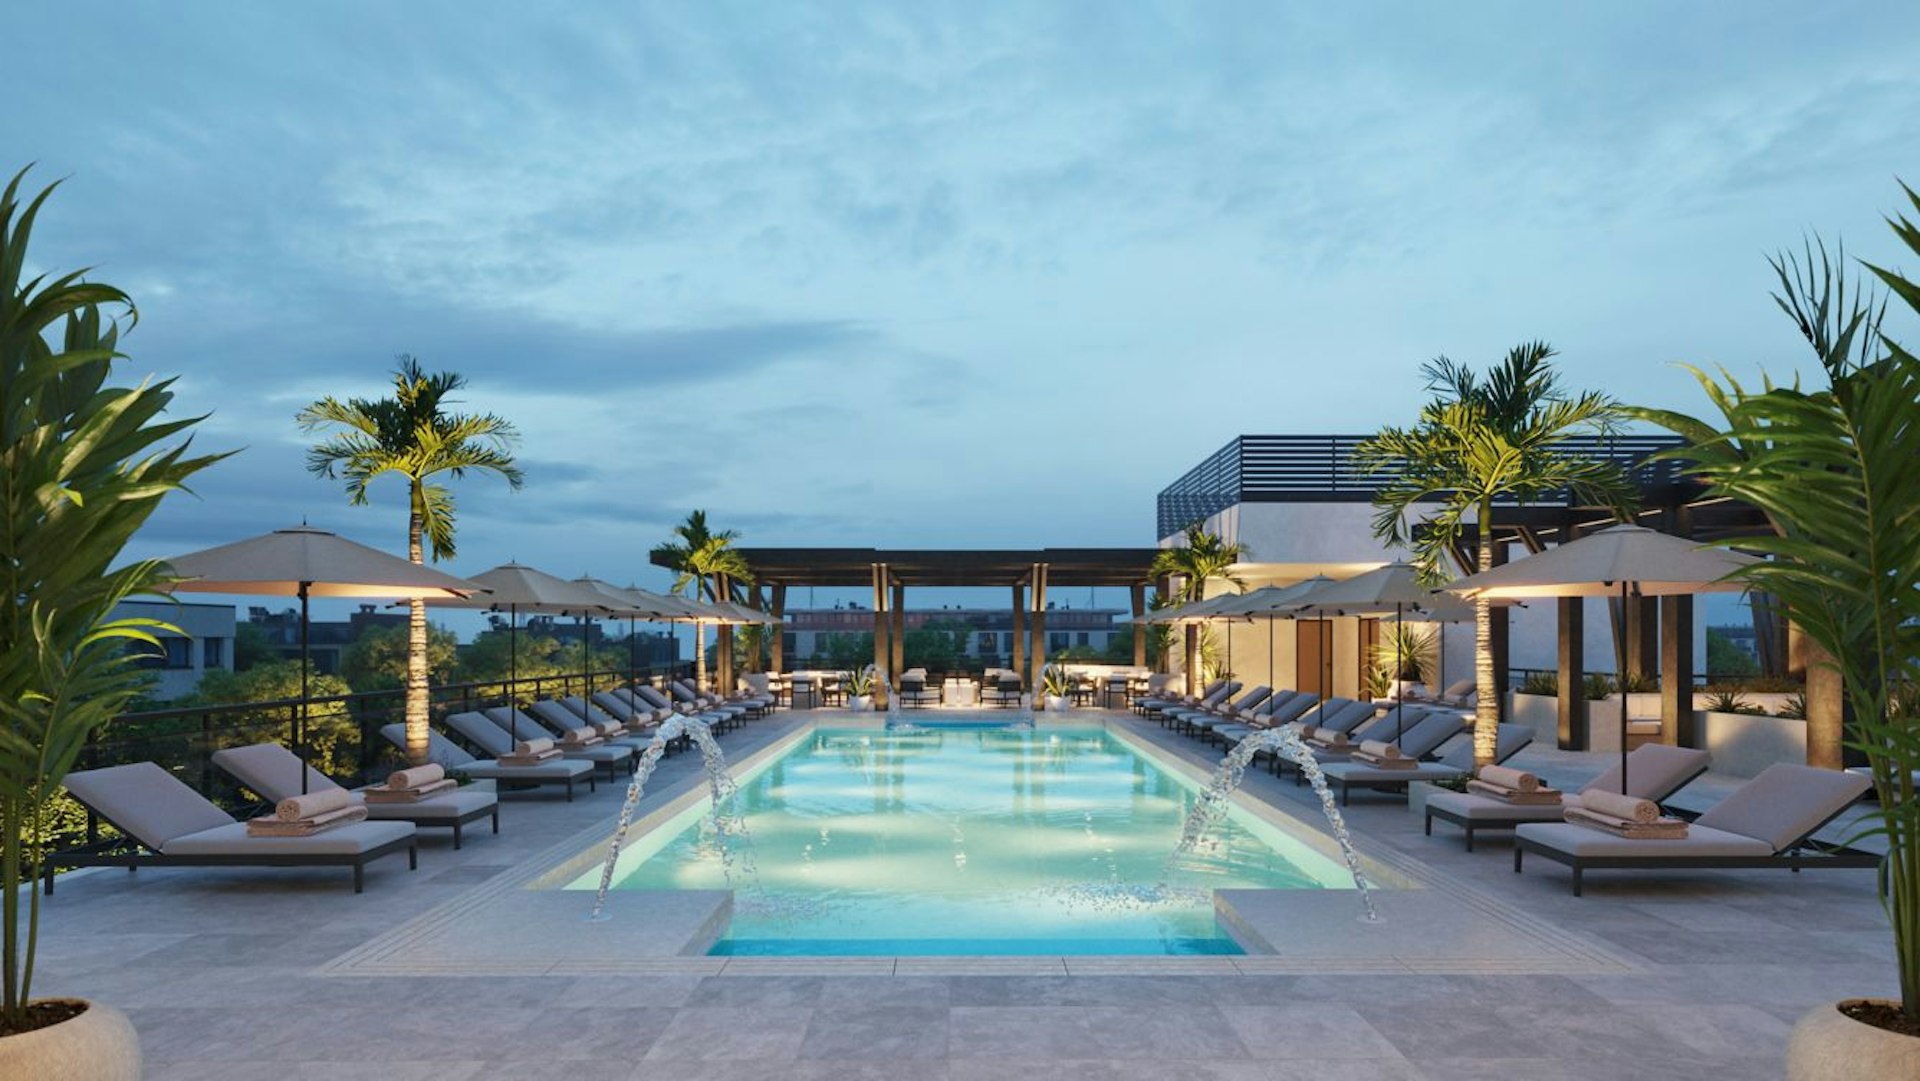 Sunloungers are arranged around a stylish rooftop pool, which is illuminated with pale blue lights